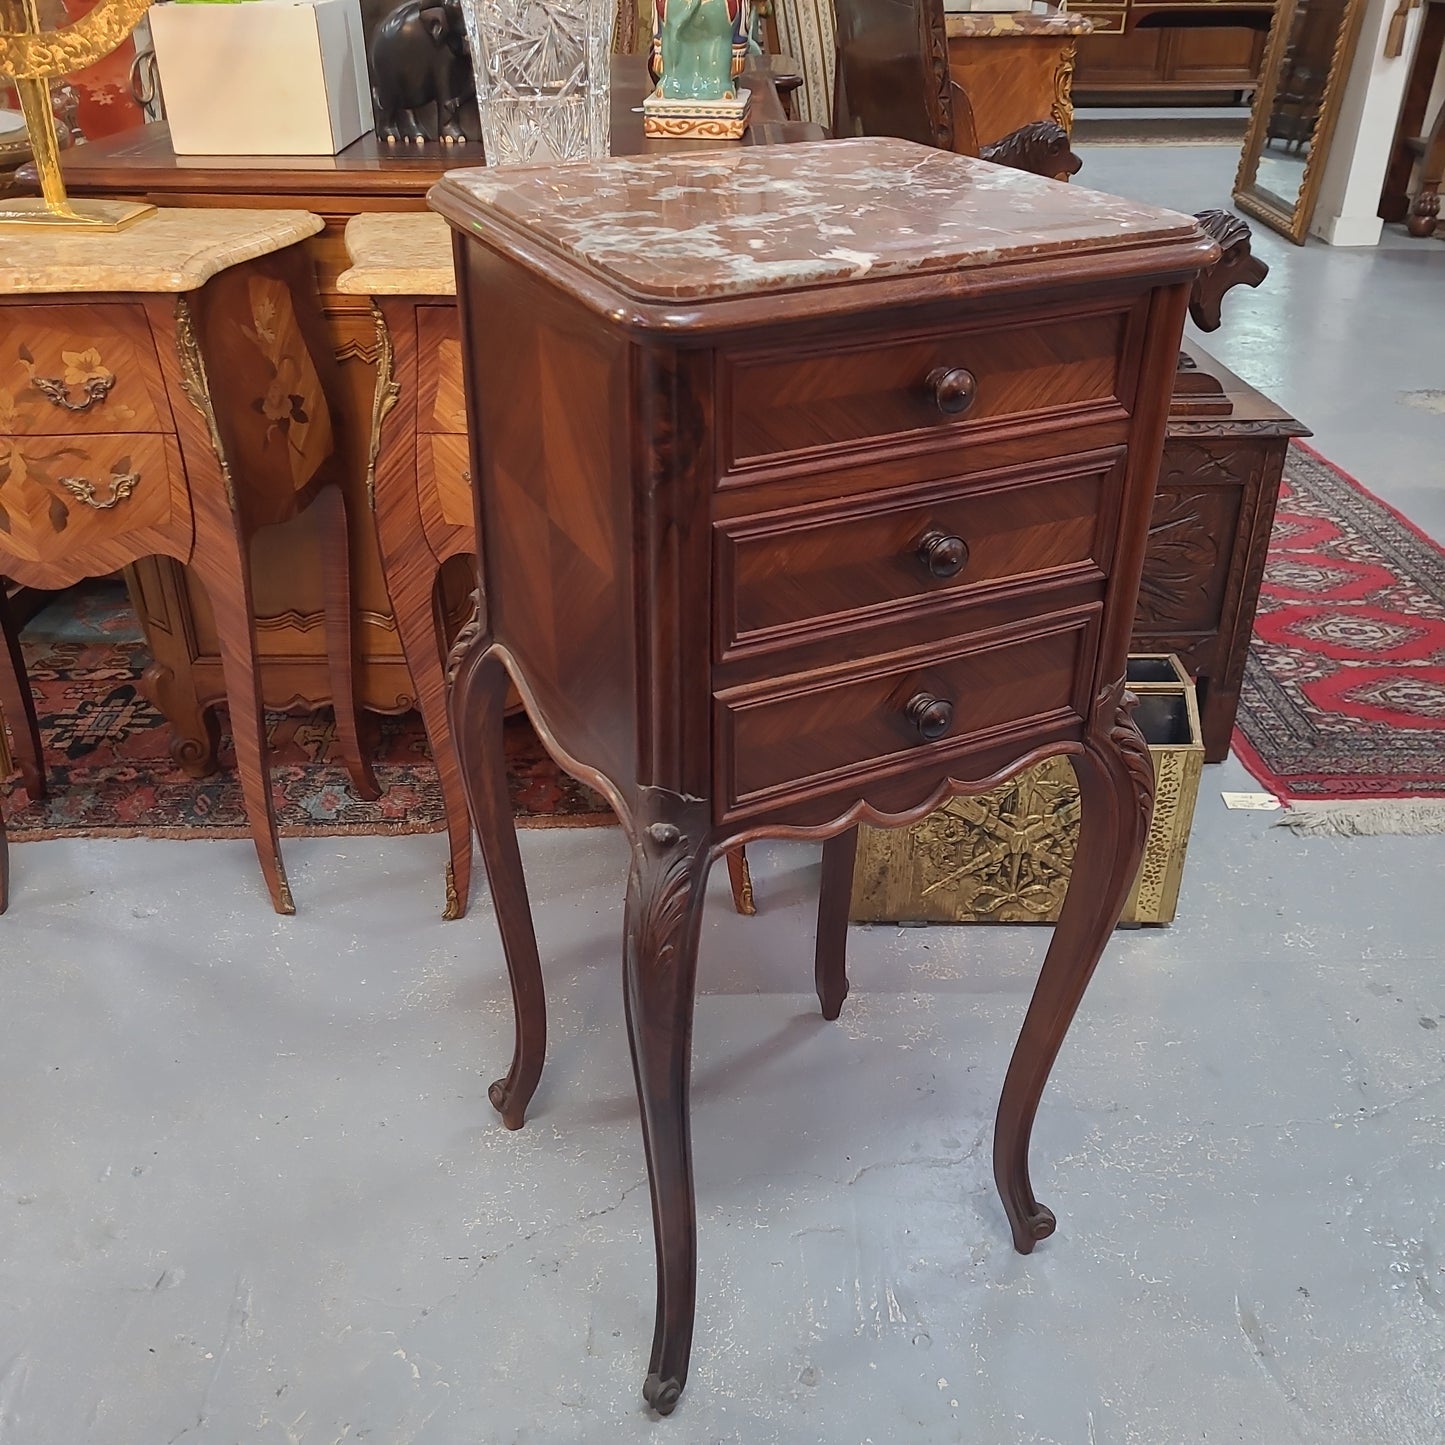 French Rosewood Louis XV Style Single Bedside Cabinet